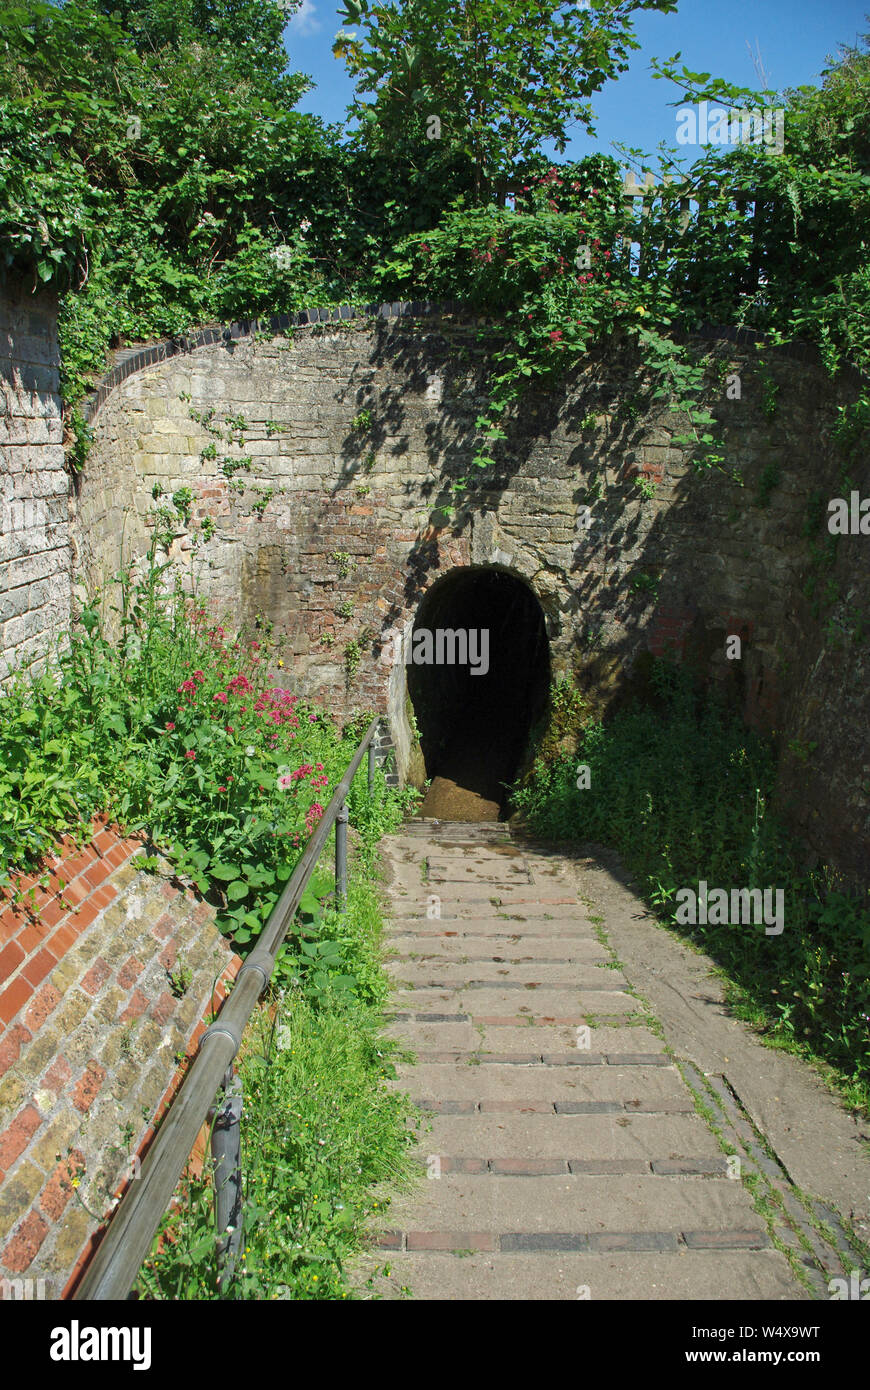 Pedestrian tunnel going under the Grand Union canal in the village of Cosgrove, Northamptonshire, UK Stock Photo